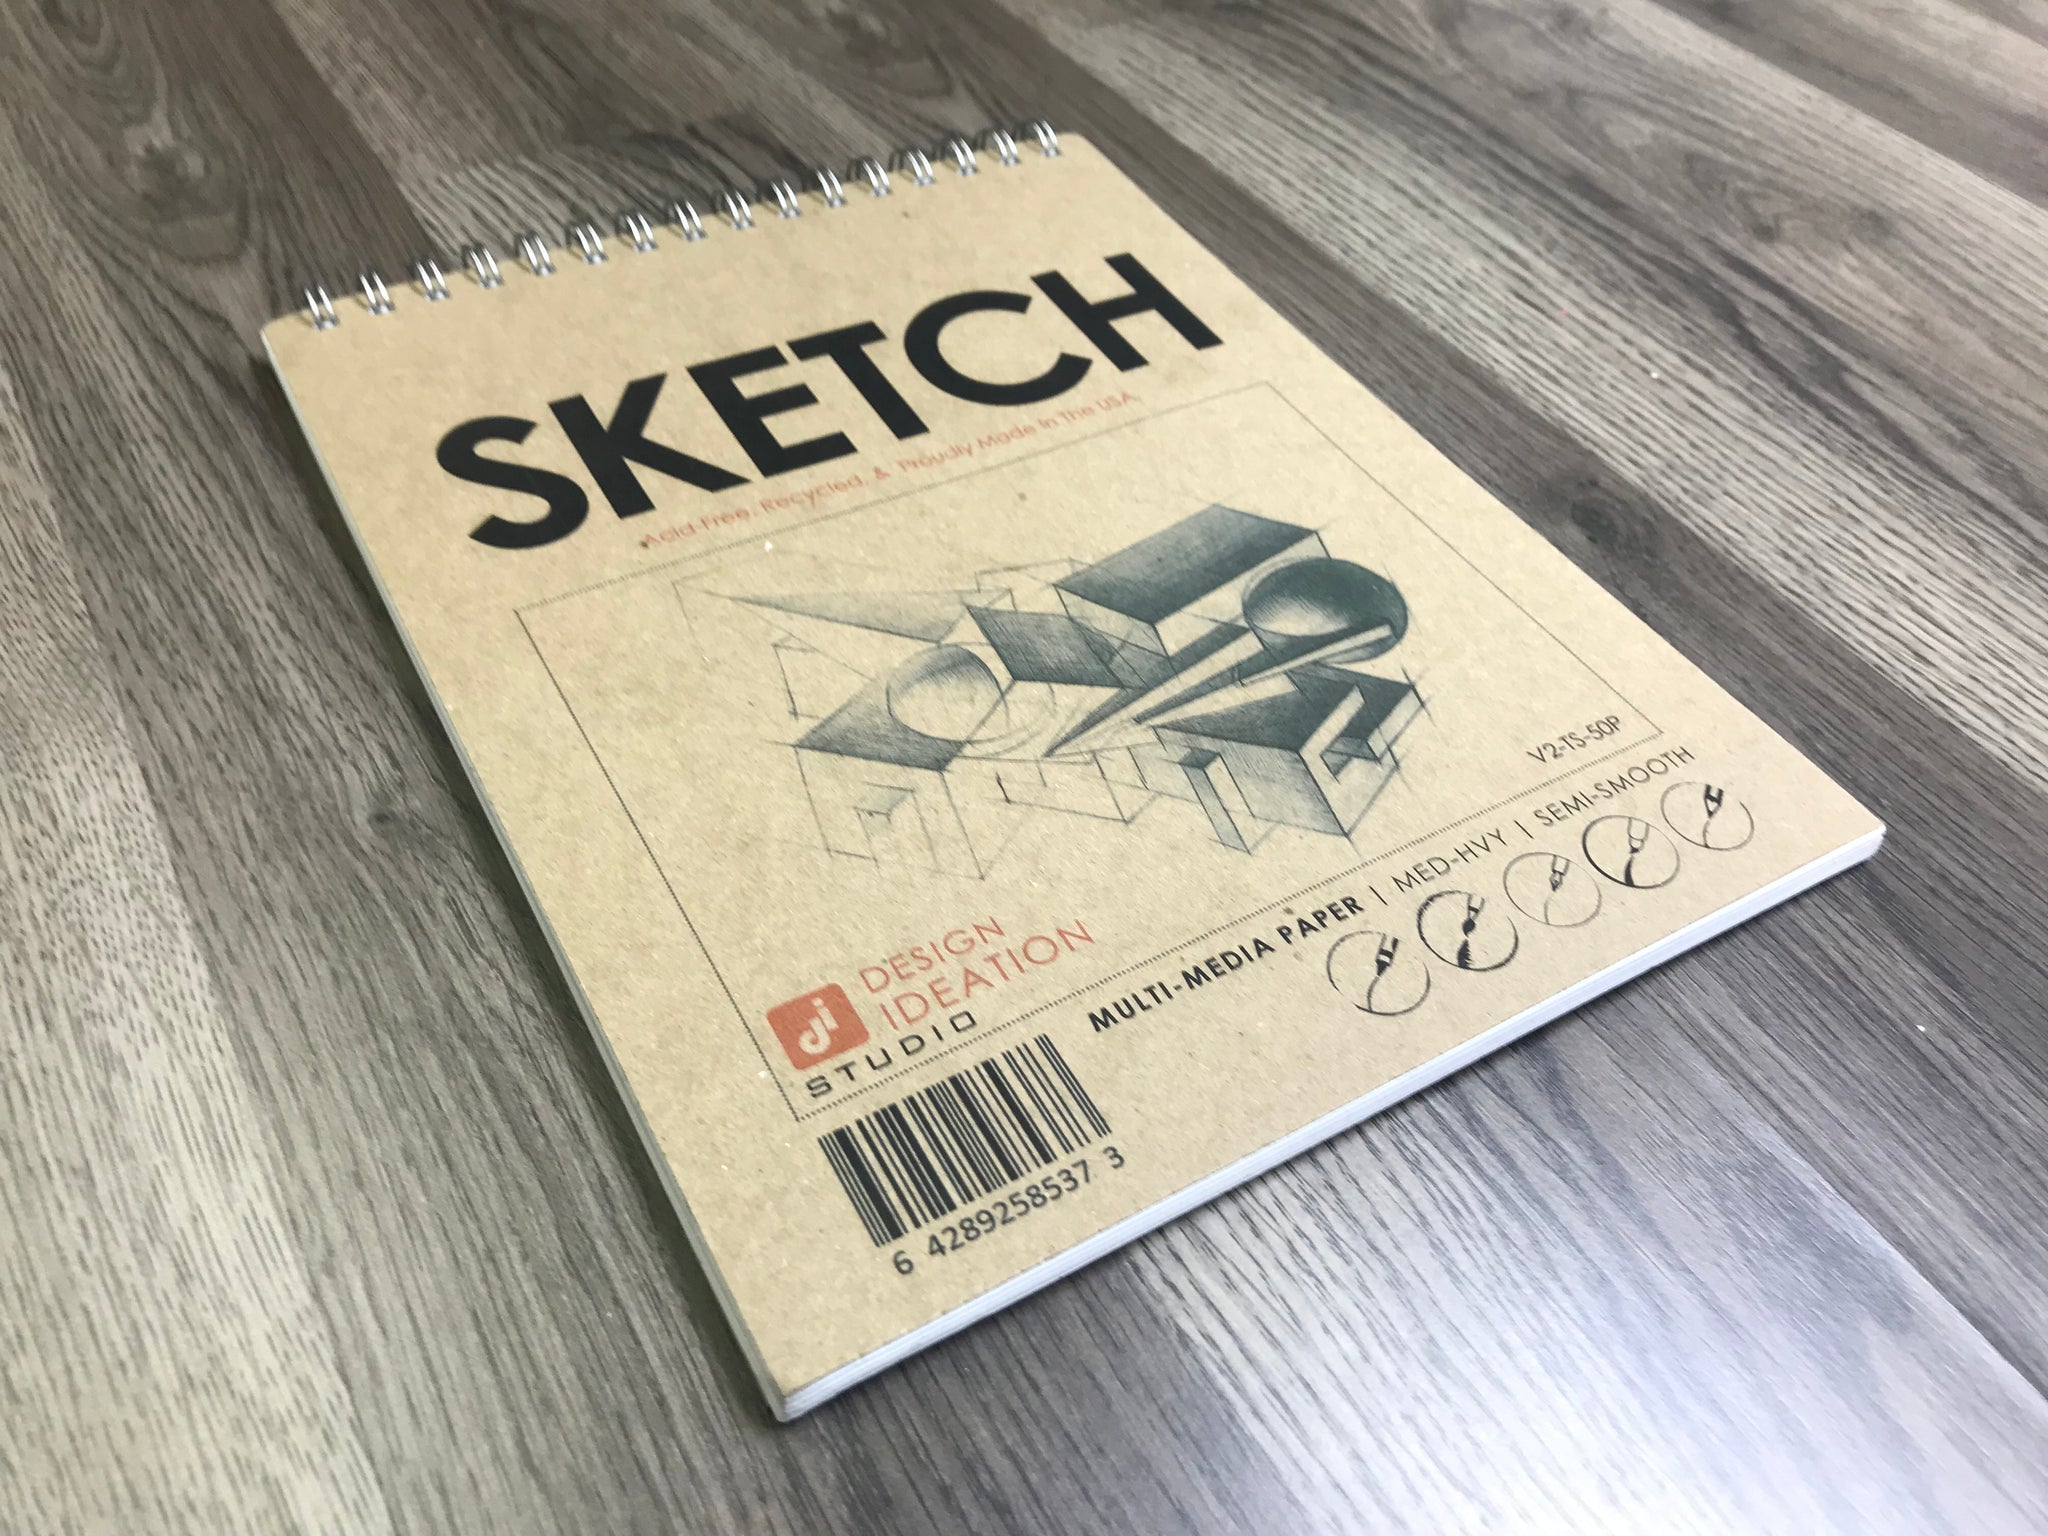 GIFTEXPRESS Pack of 12 Letter Size Sketch Book Bound Spiral Premium Sketch  Pads Set, Pencil Sketch Book 30 Sheets Each, 8.5 X 11 Side Wire Bound,  White Blank Paper Sheets for Pencil